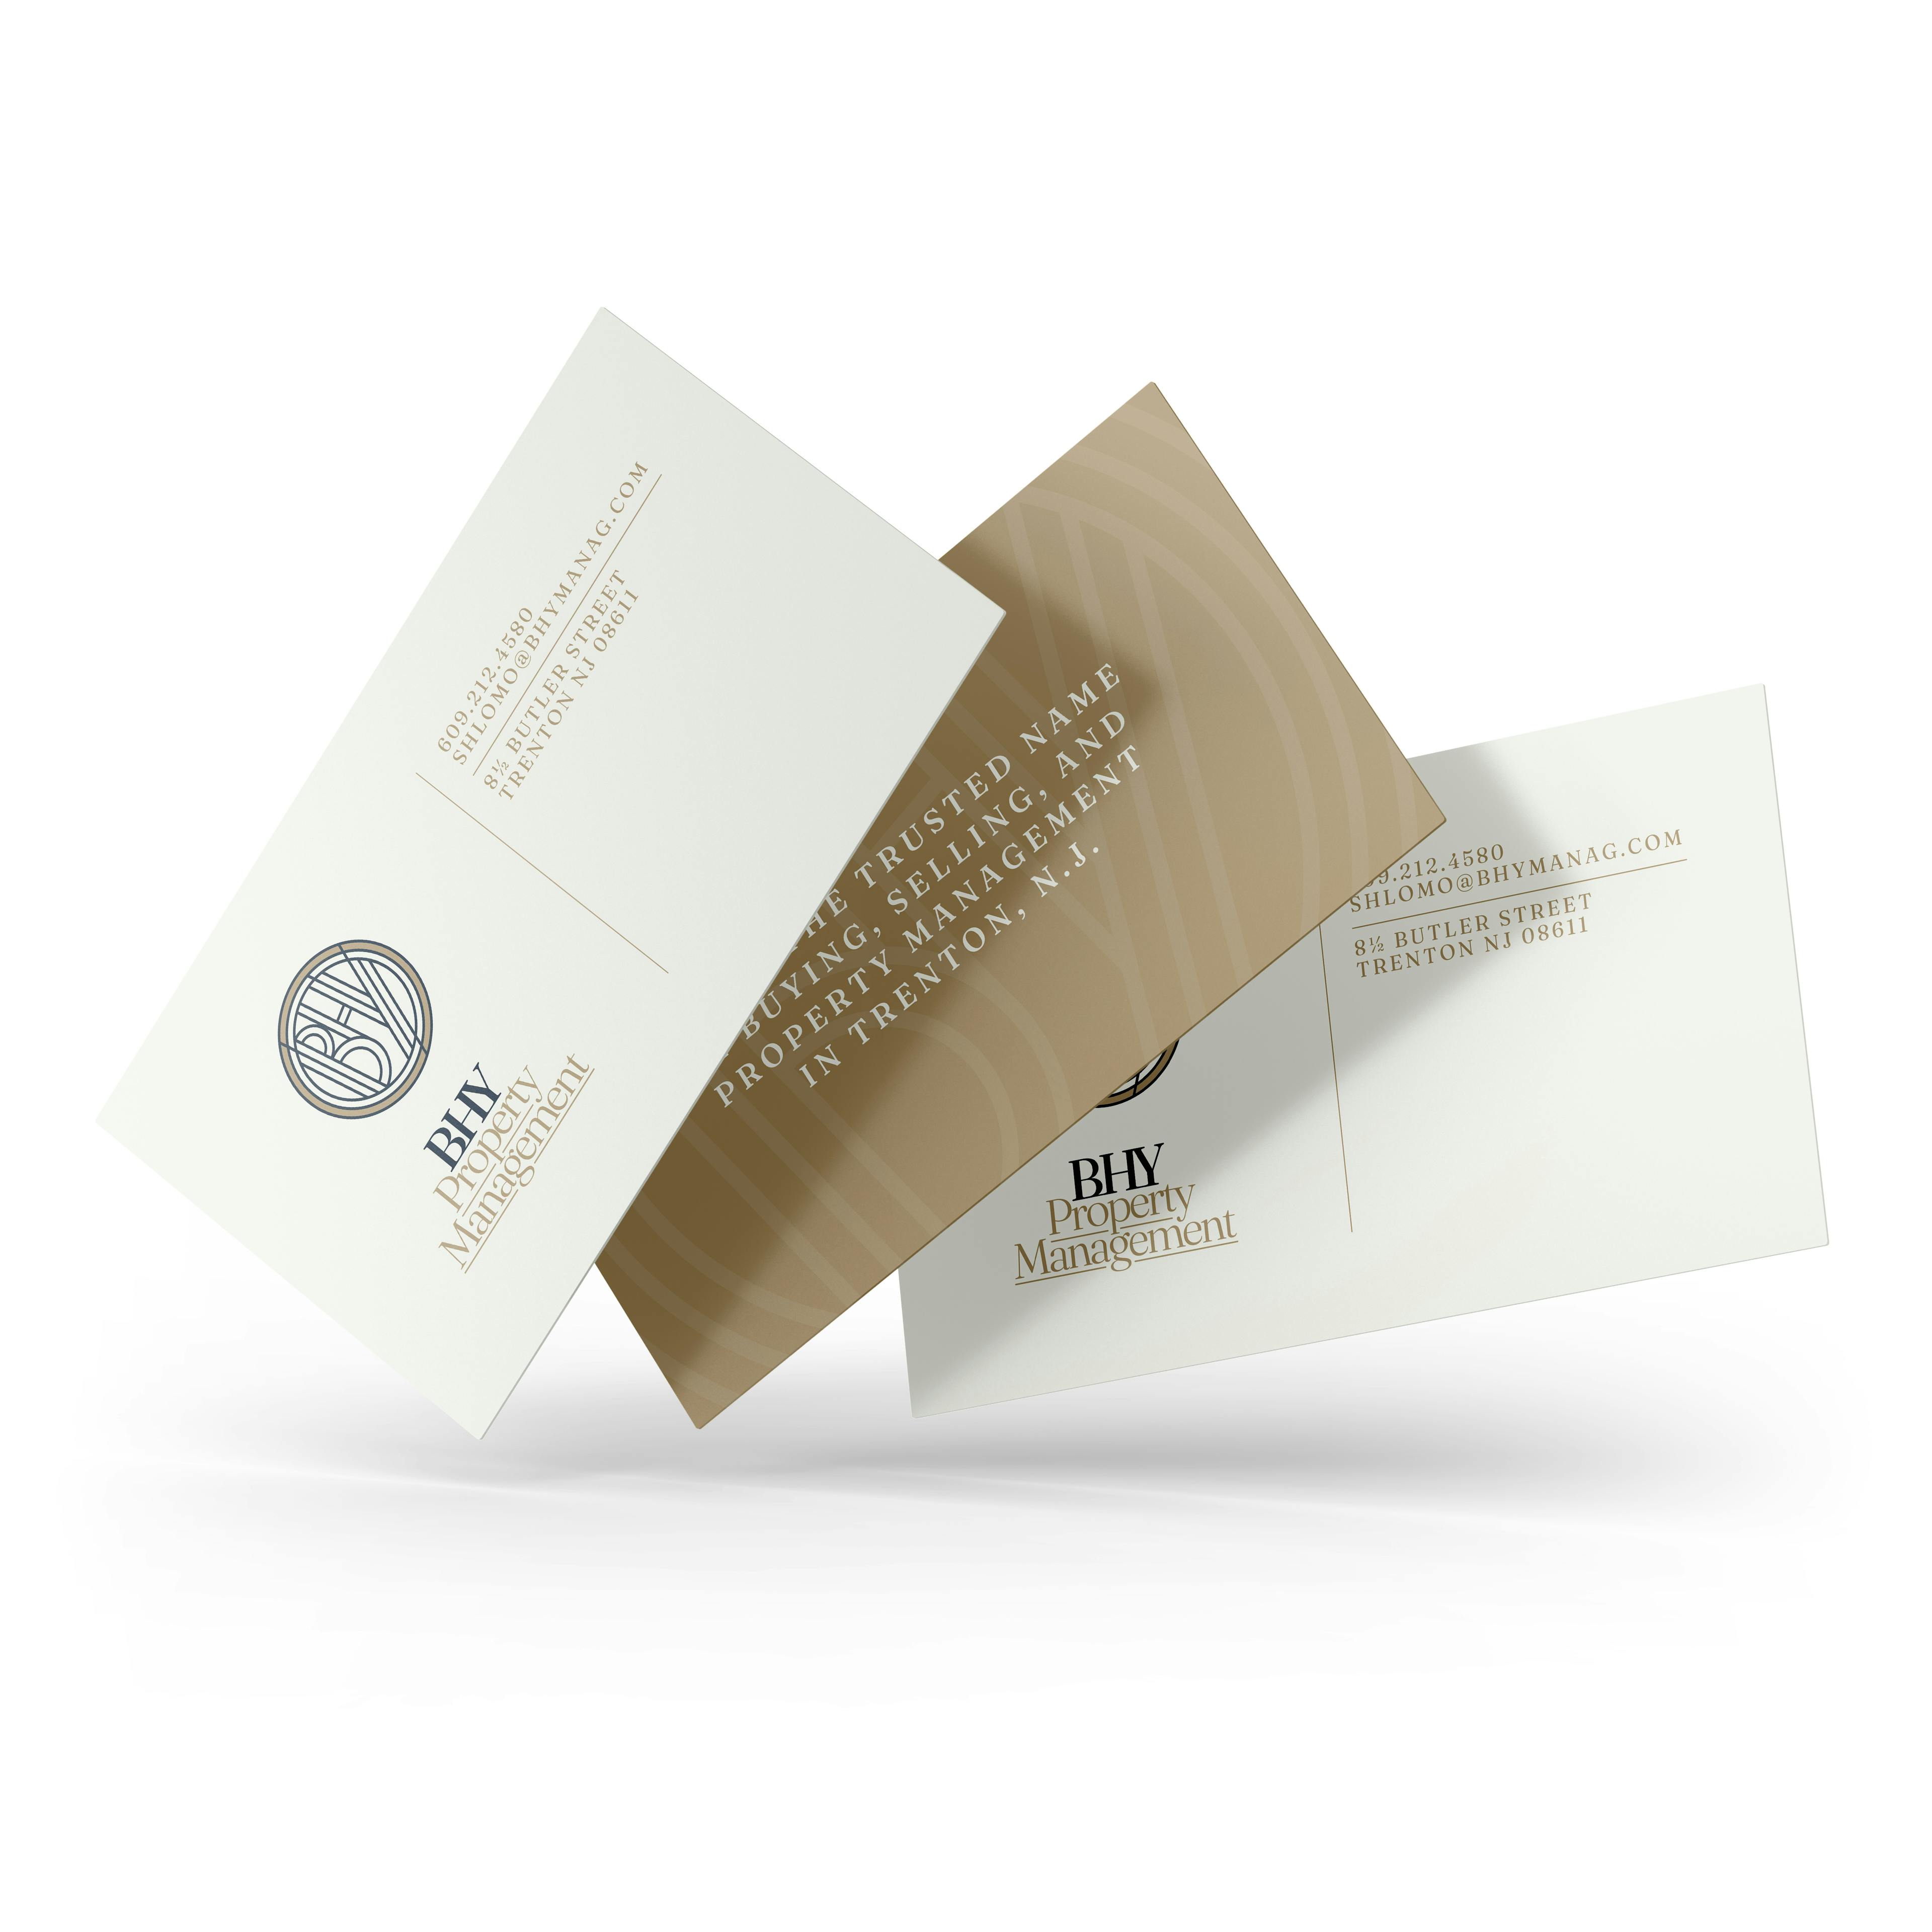 bhy property management business cards, branding by d7mtg